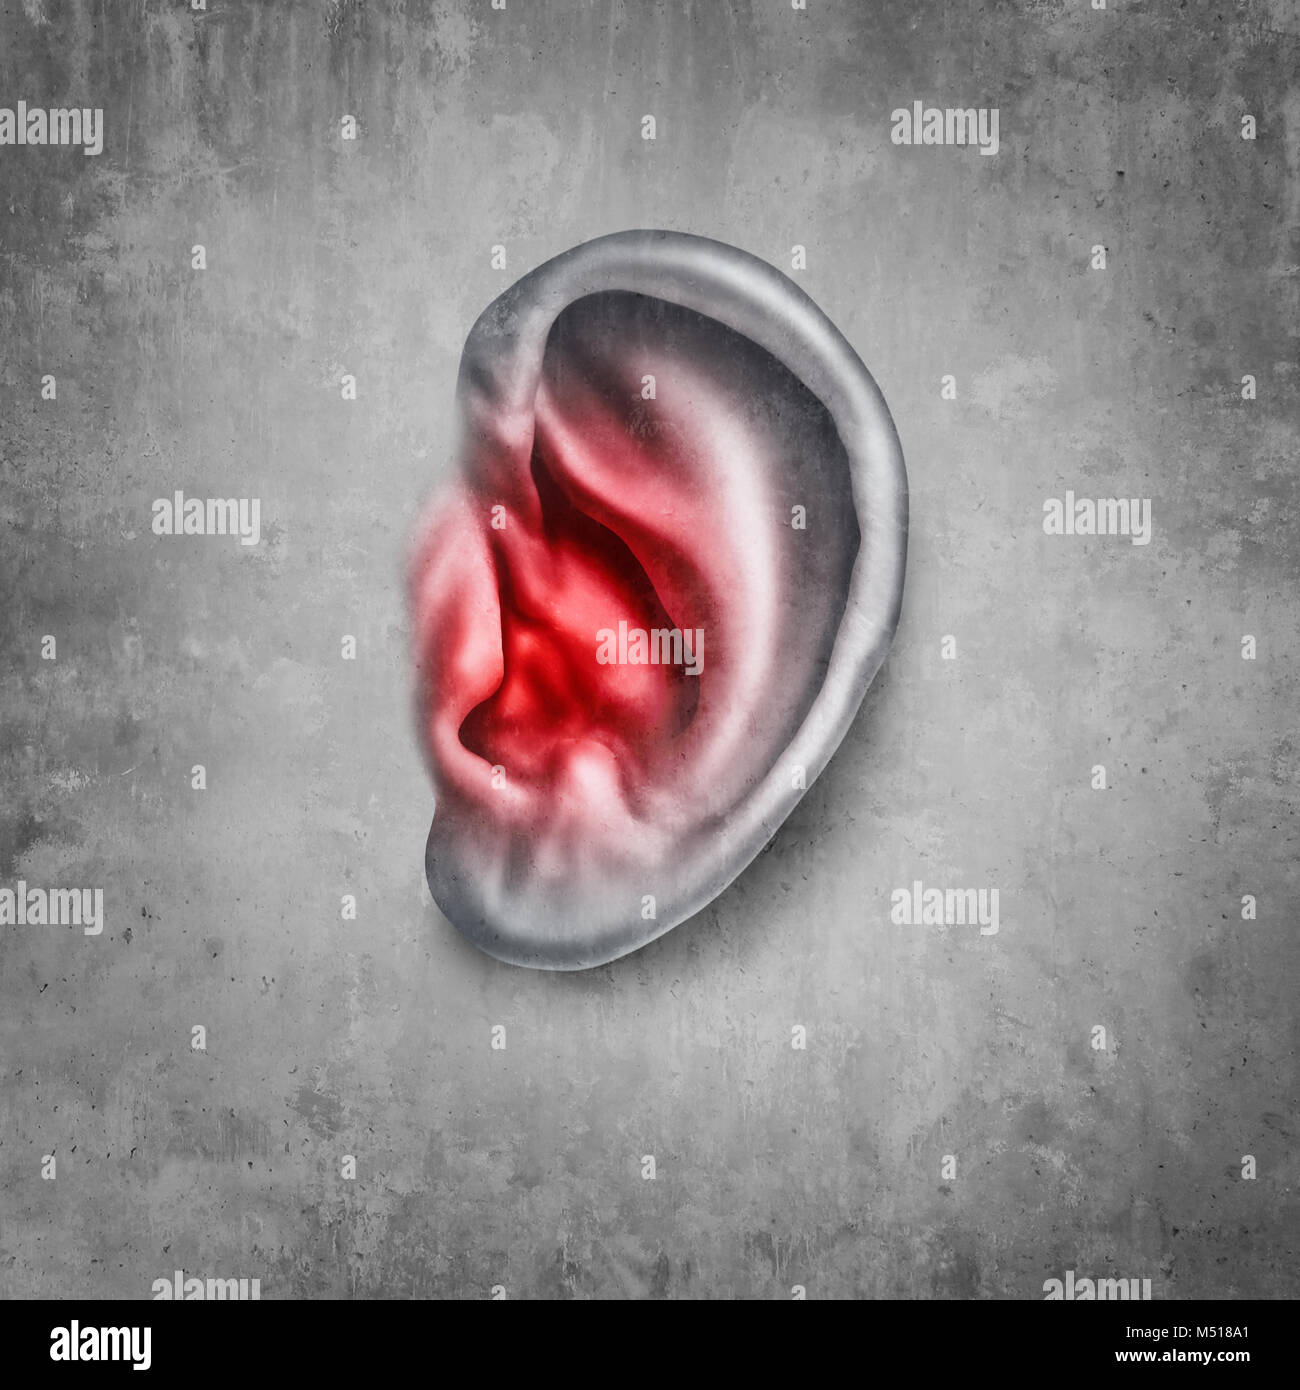 Tinnitus and ringing in the ear as a medical symptom and diagnosis of hearing loss in a 3D illustration style. Stock Photo